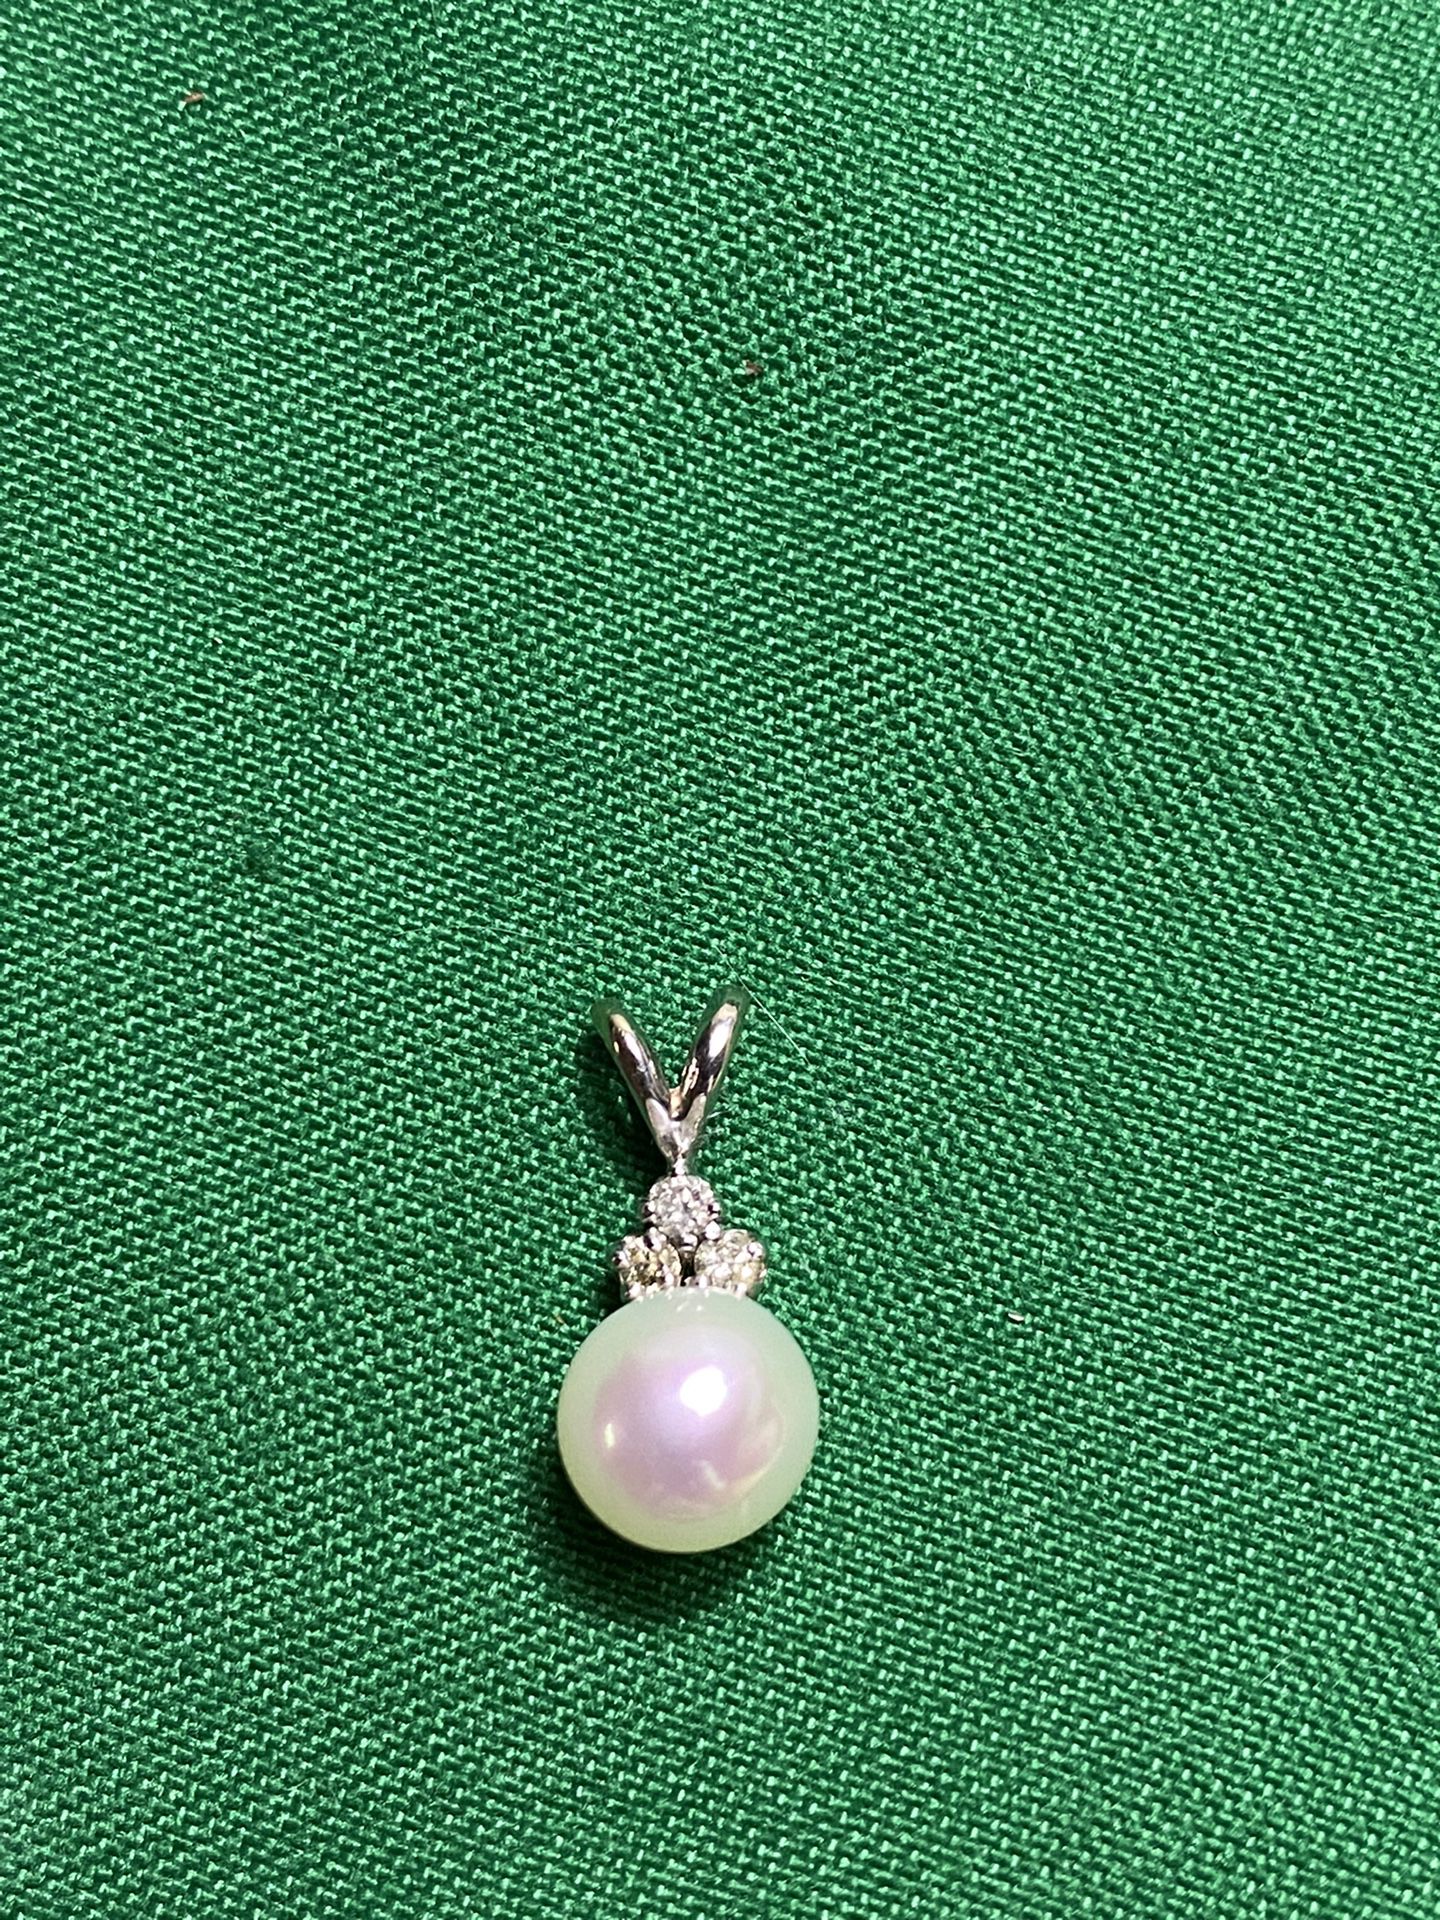 18k White Gold Pearl Charm for Sale in Bellevue, WA - OfferUp